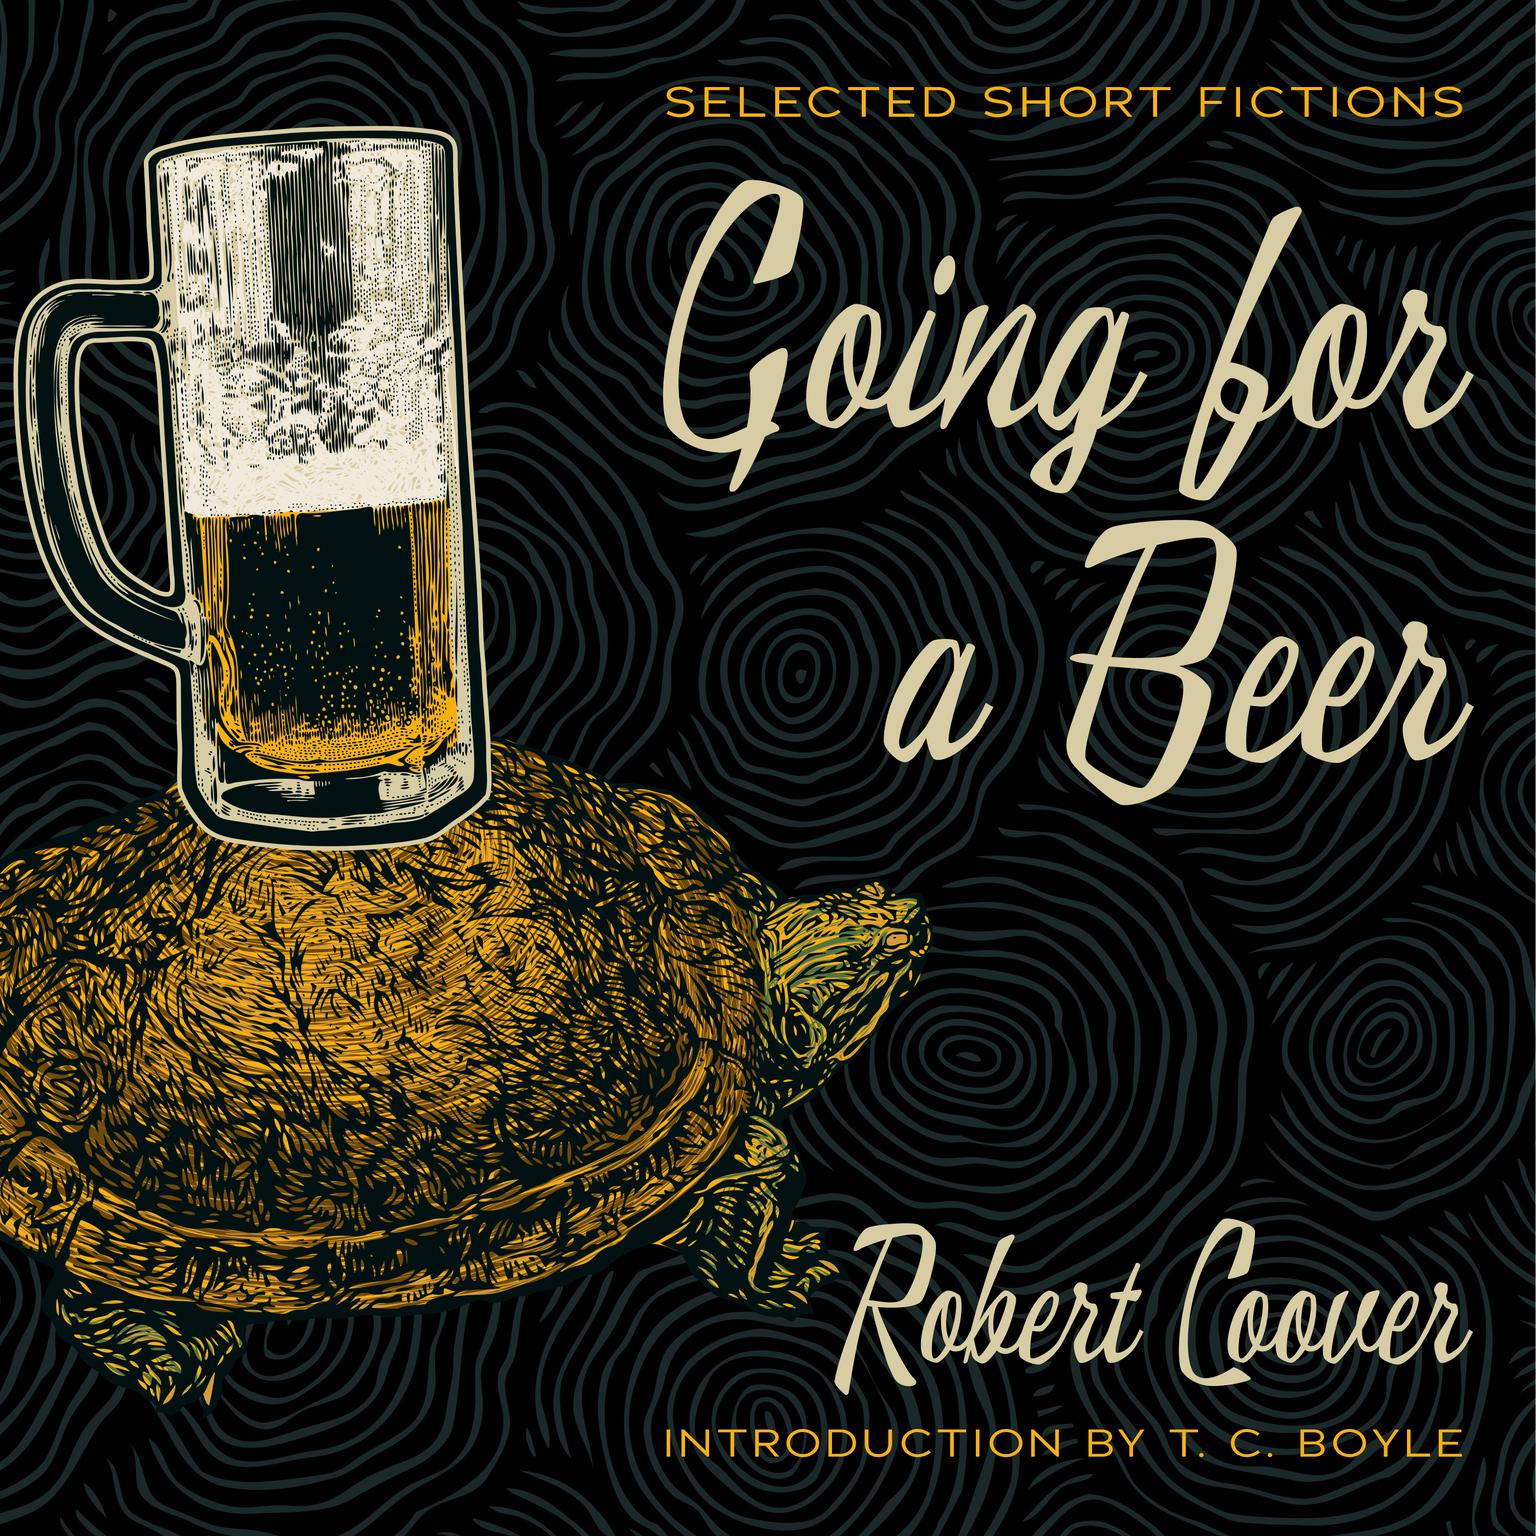 Going for a Beer: Selected Short Fictions Audiobook, by Robert Coover